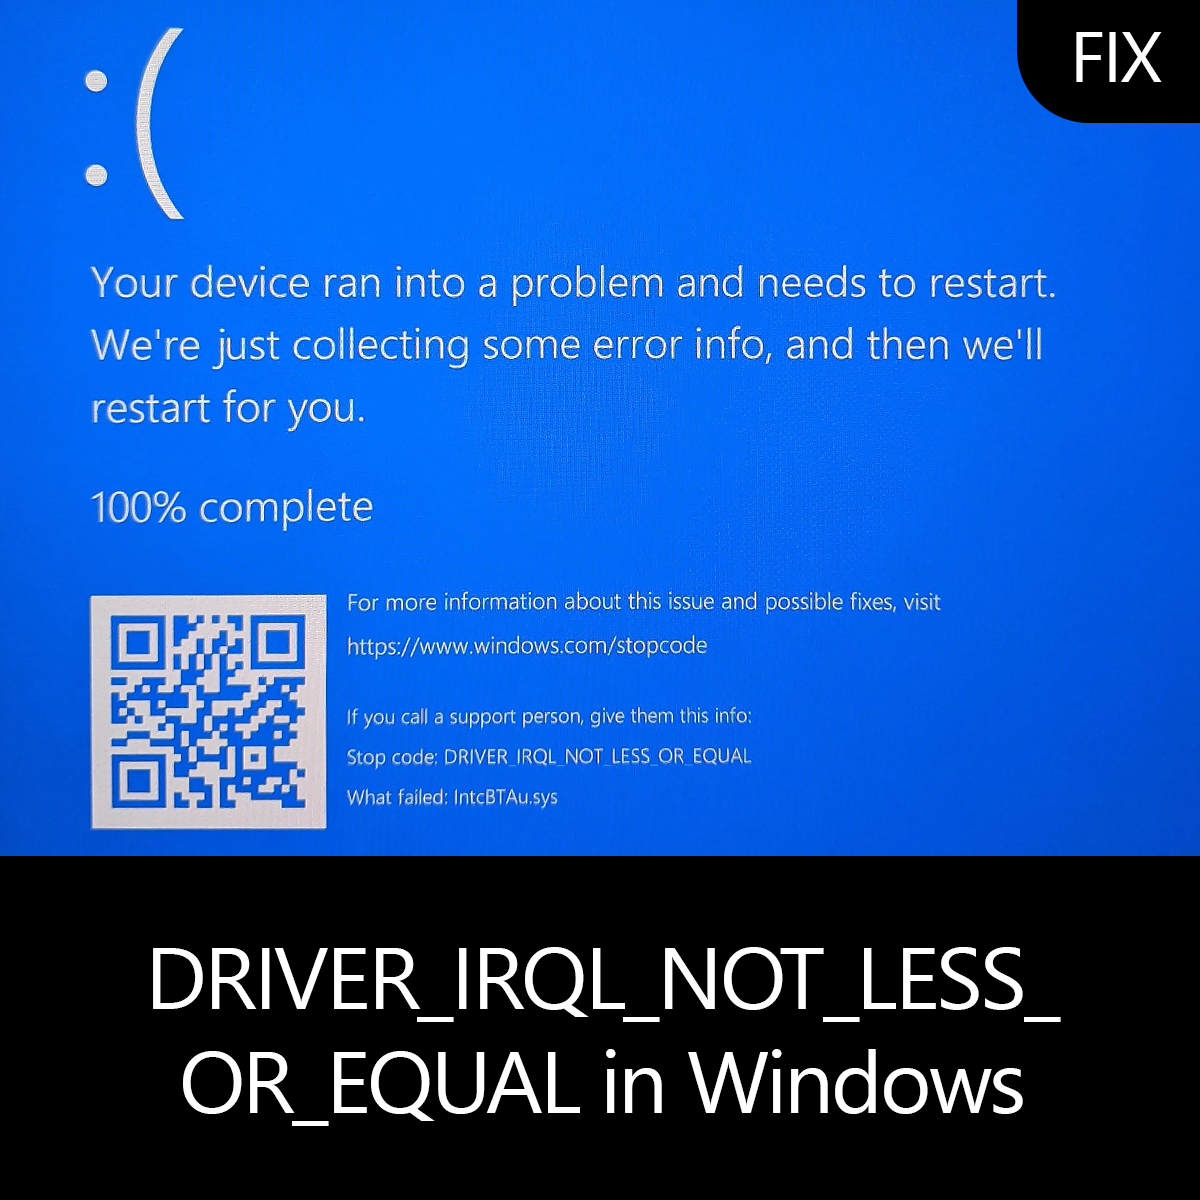 driver irql not less or equal